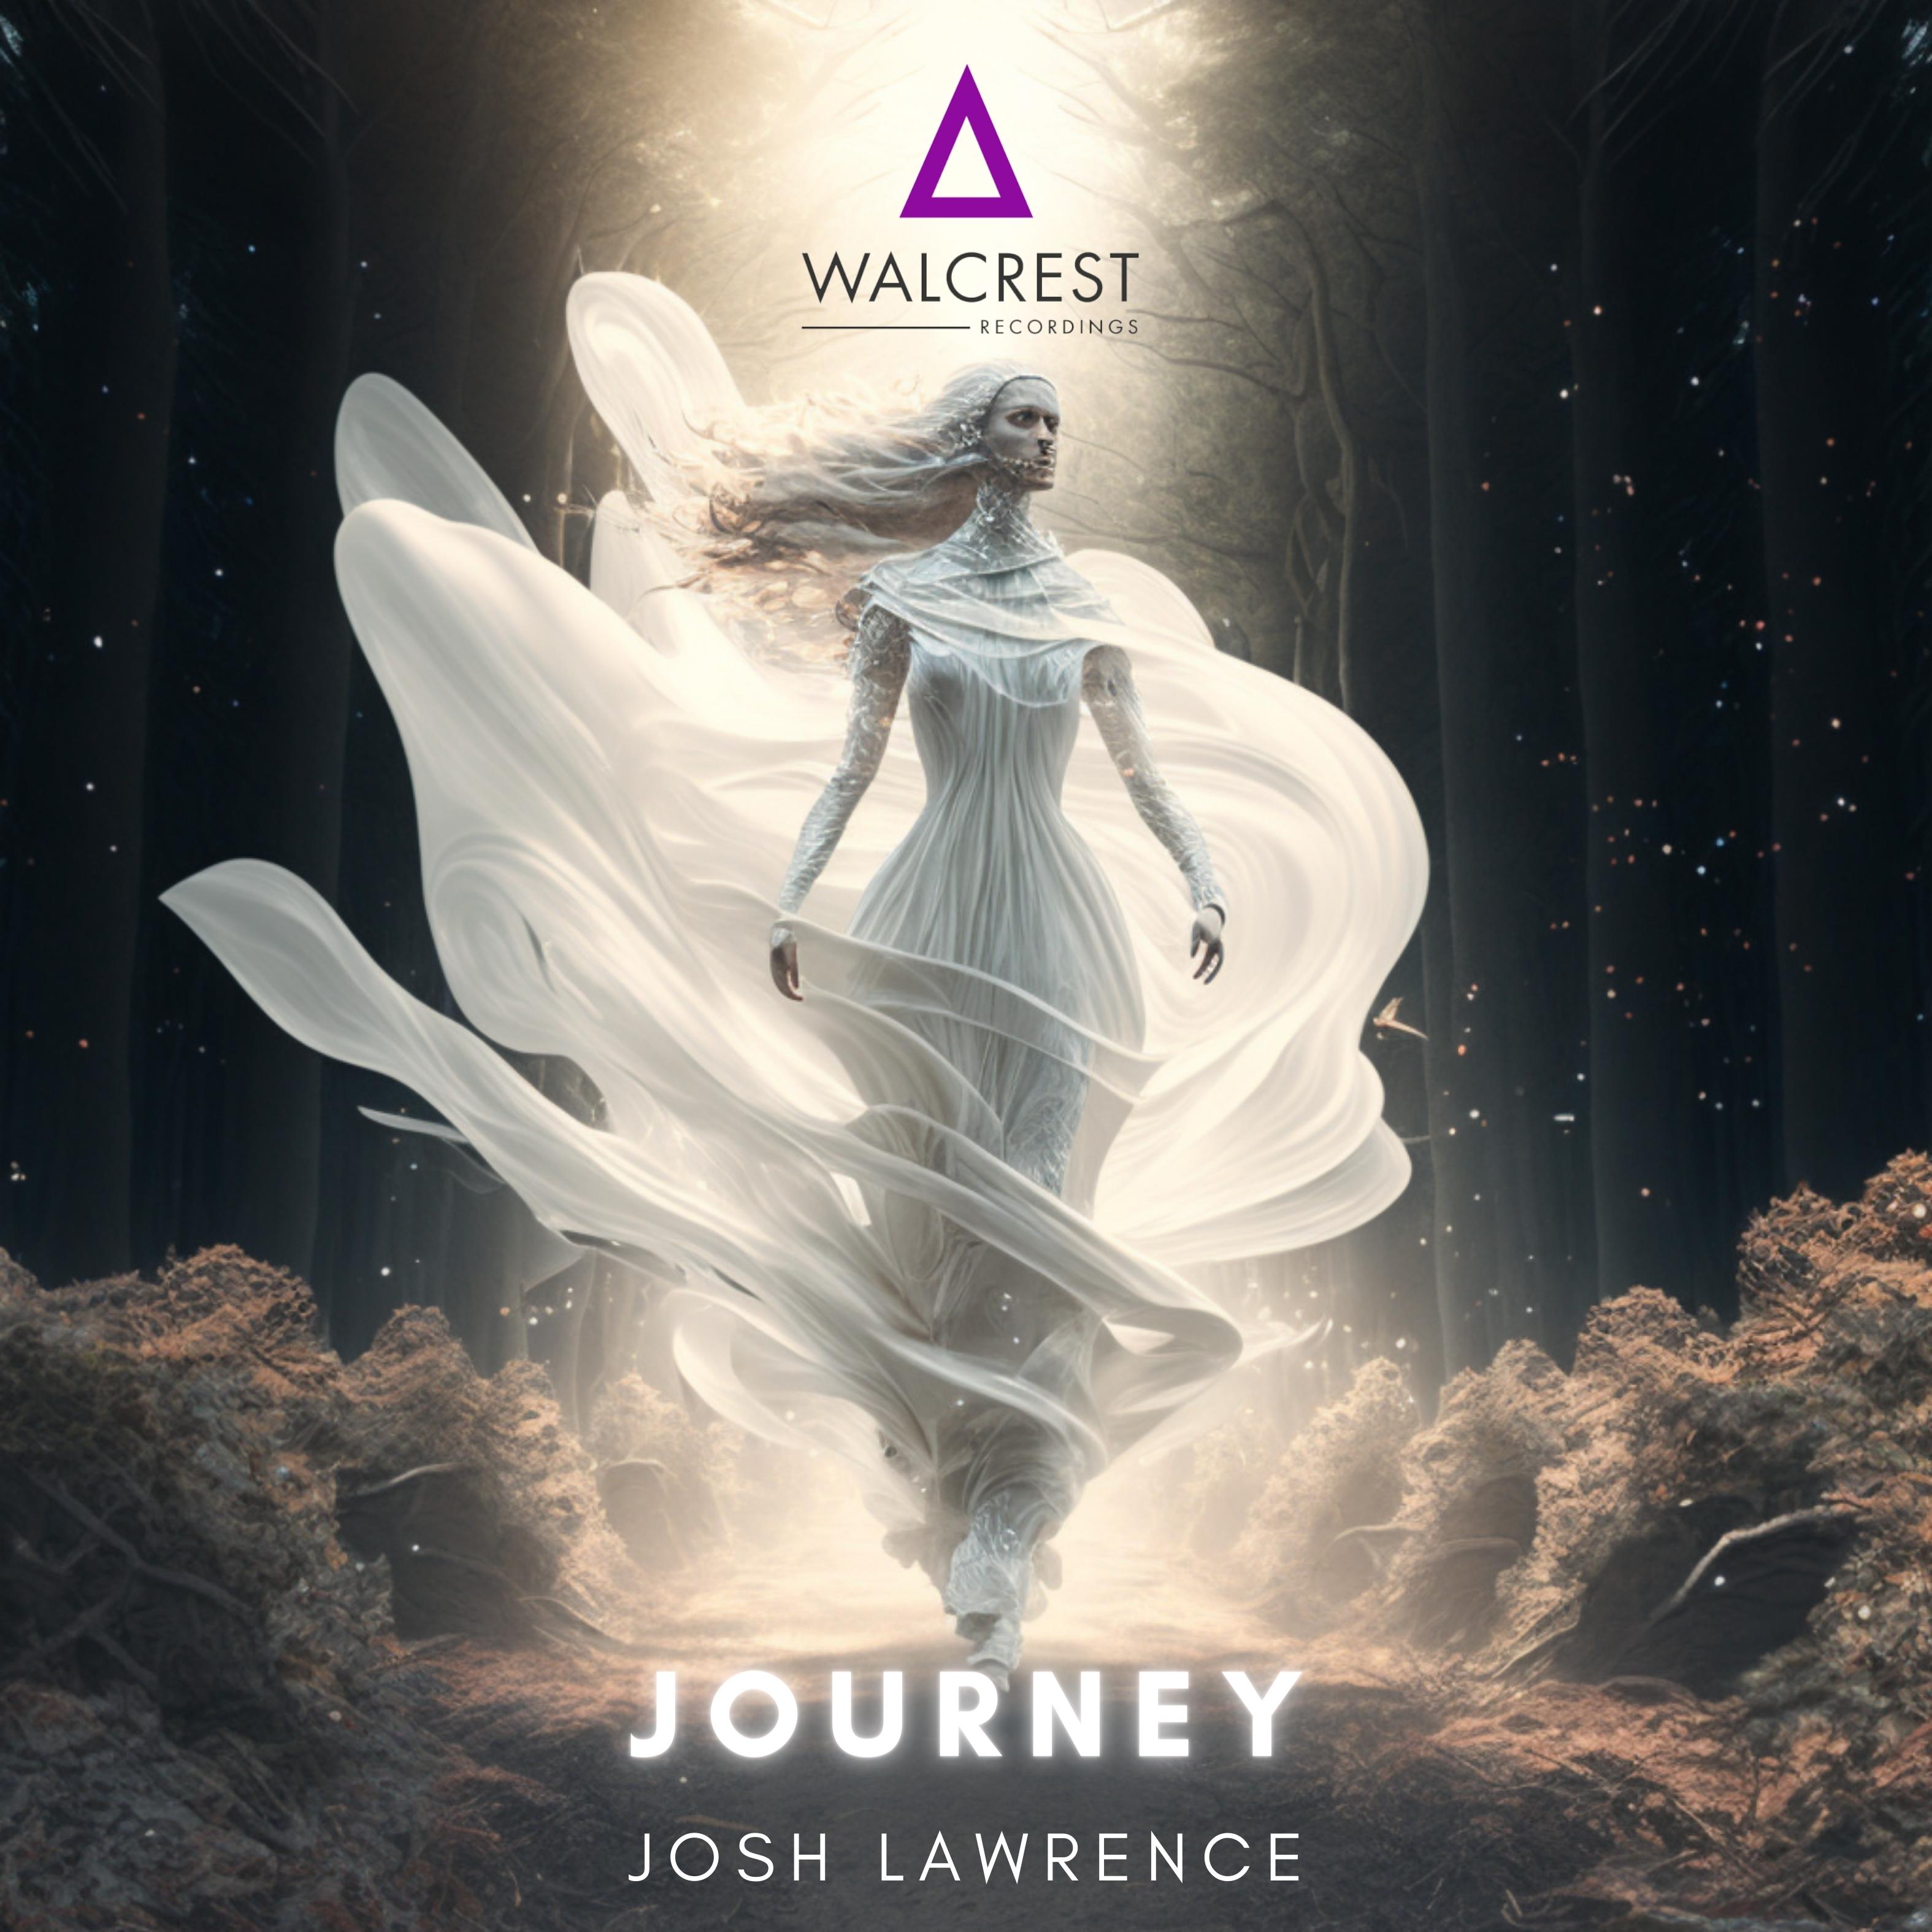 Album cover for 'Journey,' a serene and melodic track by Josh Lawrence, featuring tranquil artwork that mirrors the scenic and contemplative vibes, ideal for a blissful drive.